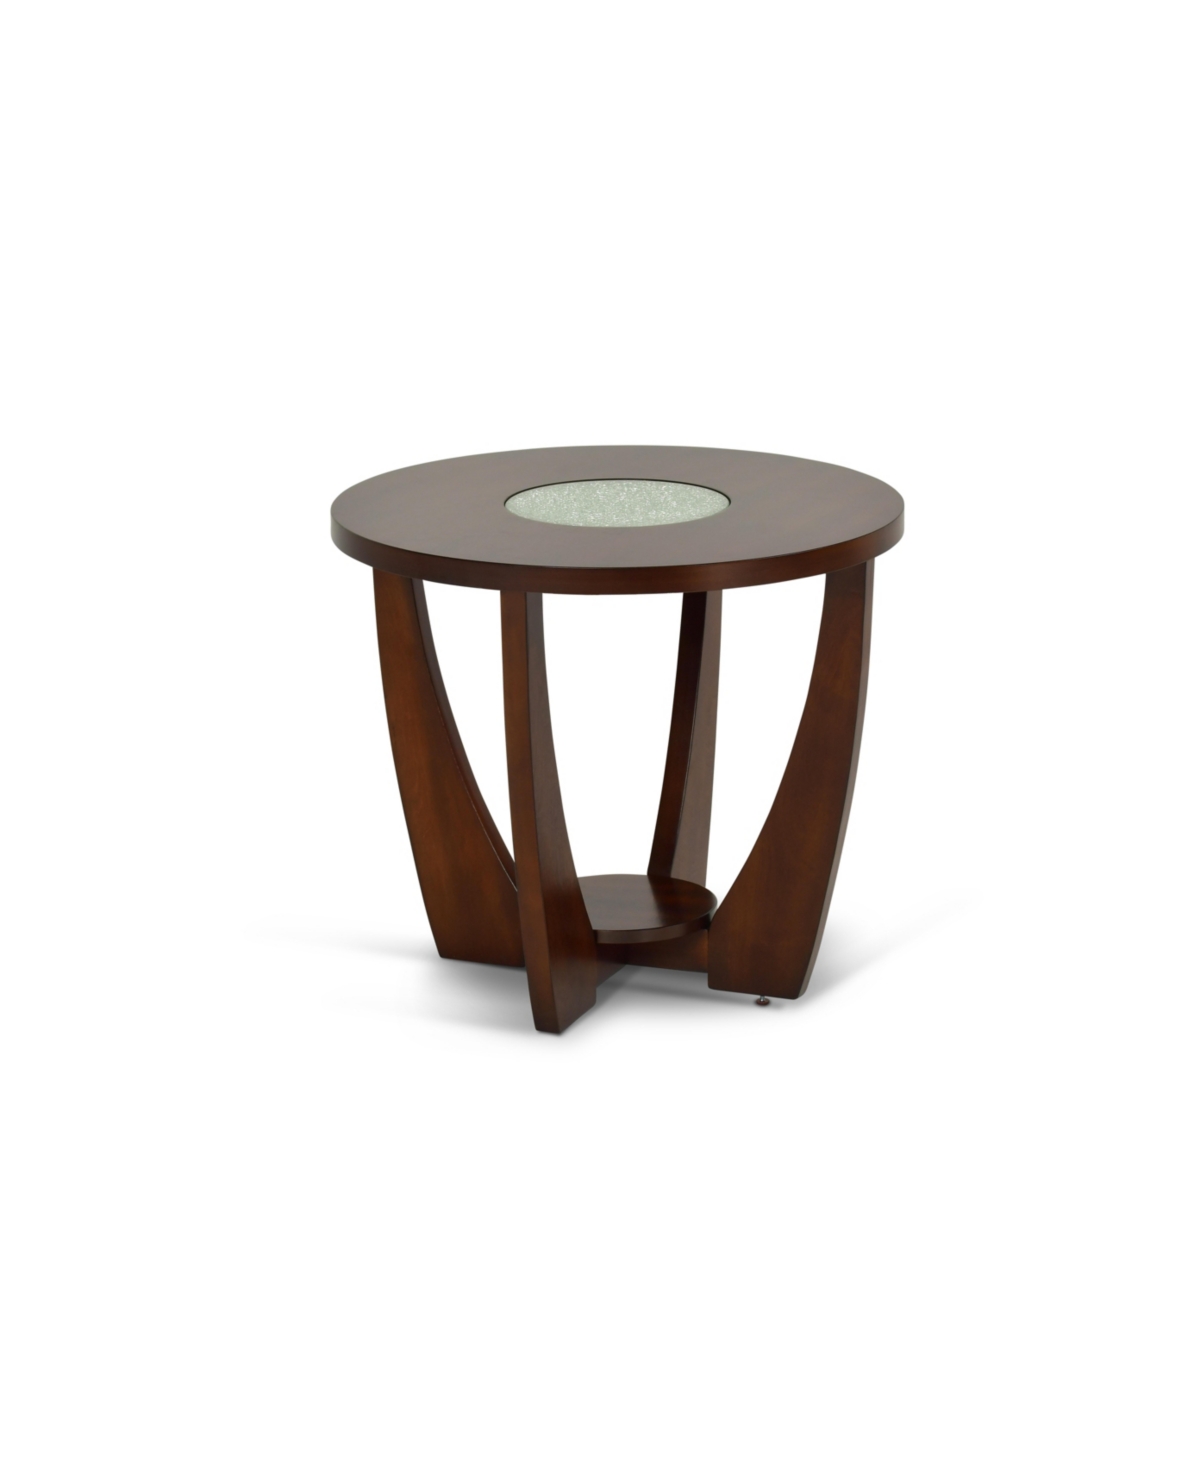 Steve Silver Rafael 25.5" Round Merlot Wood End Table With Cracked Glass Insert In Merlot Cherry Finish